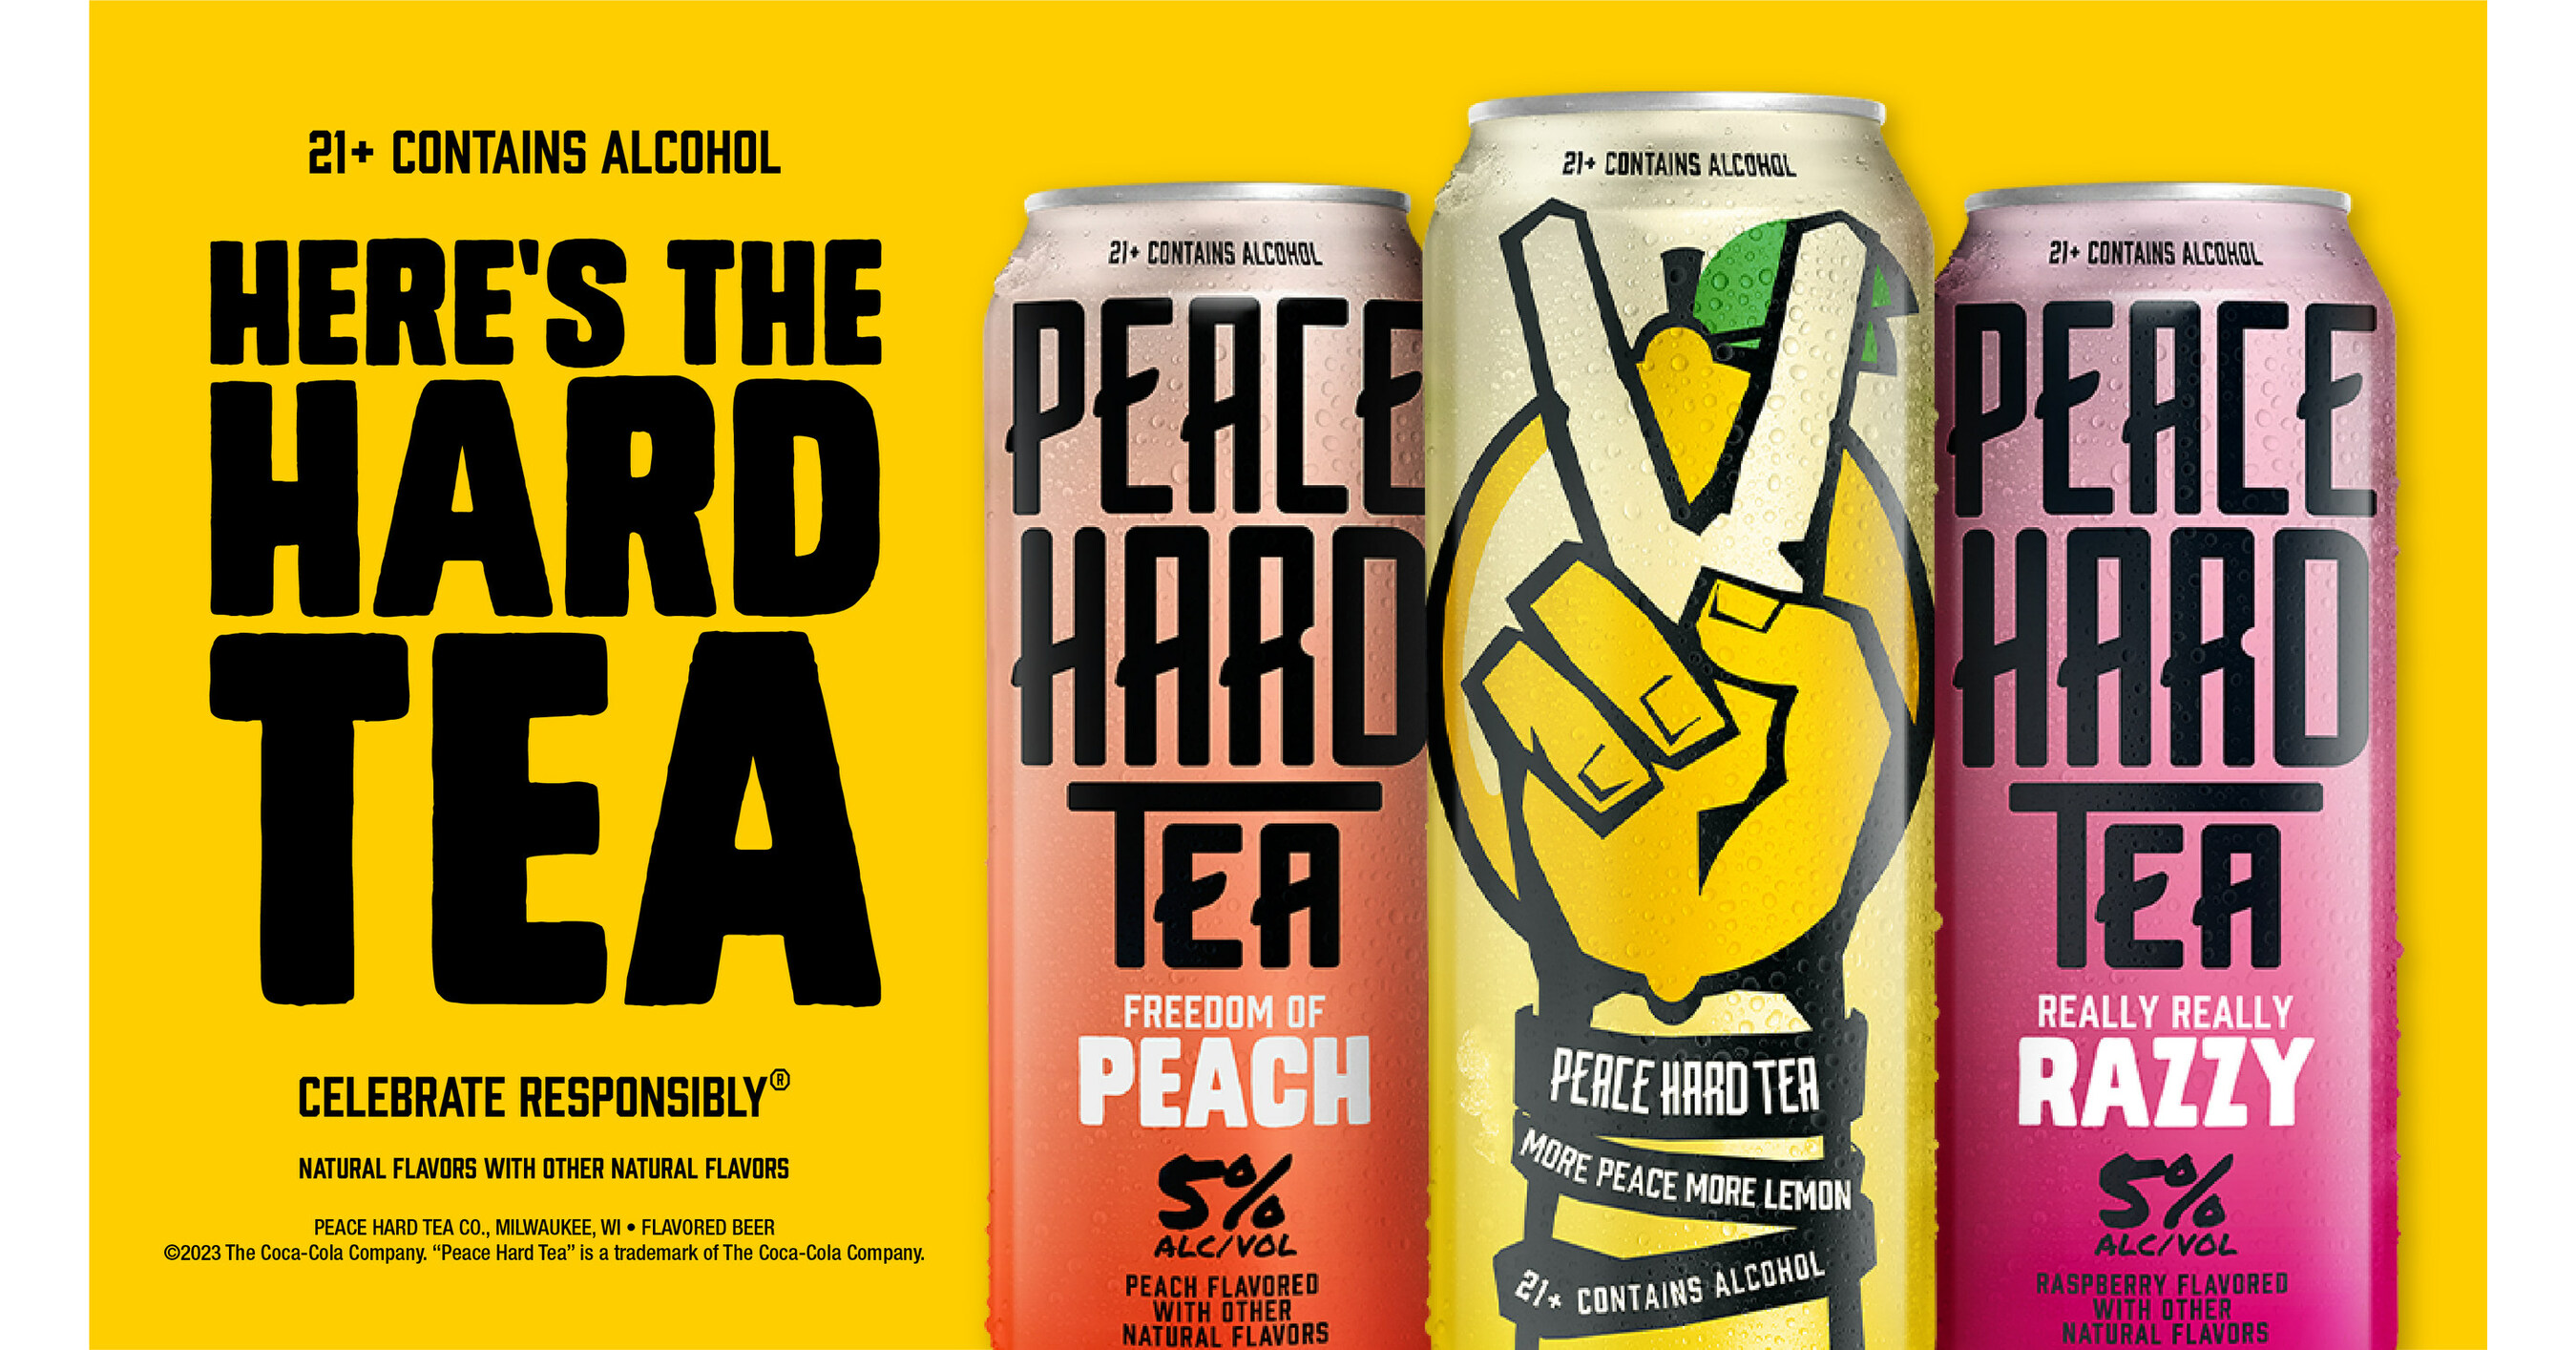 Beverage packaging reflects Latino flavor, sustainability